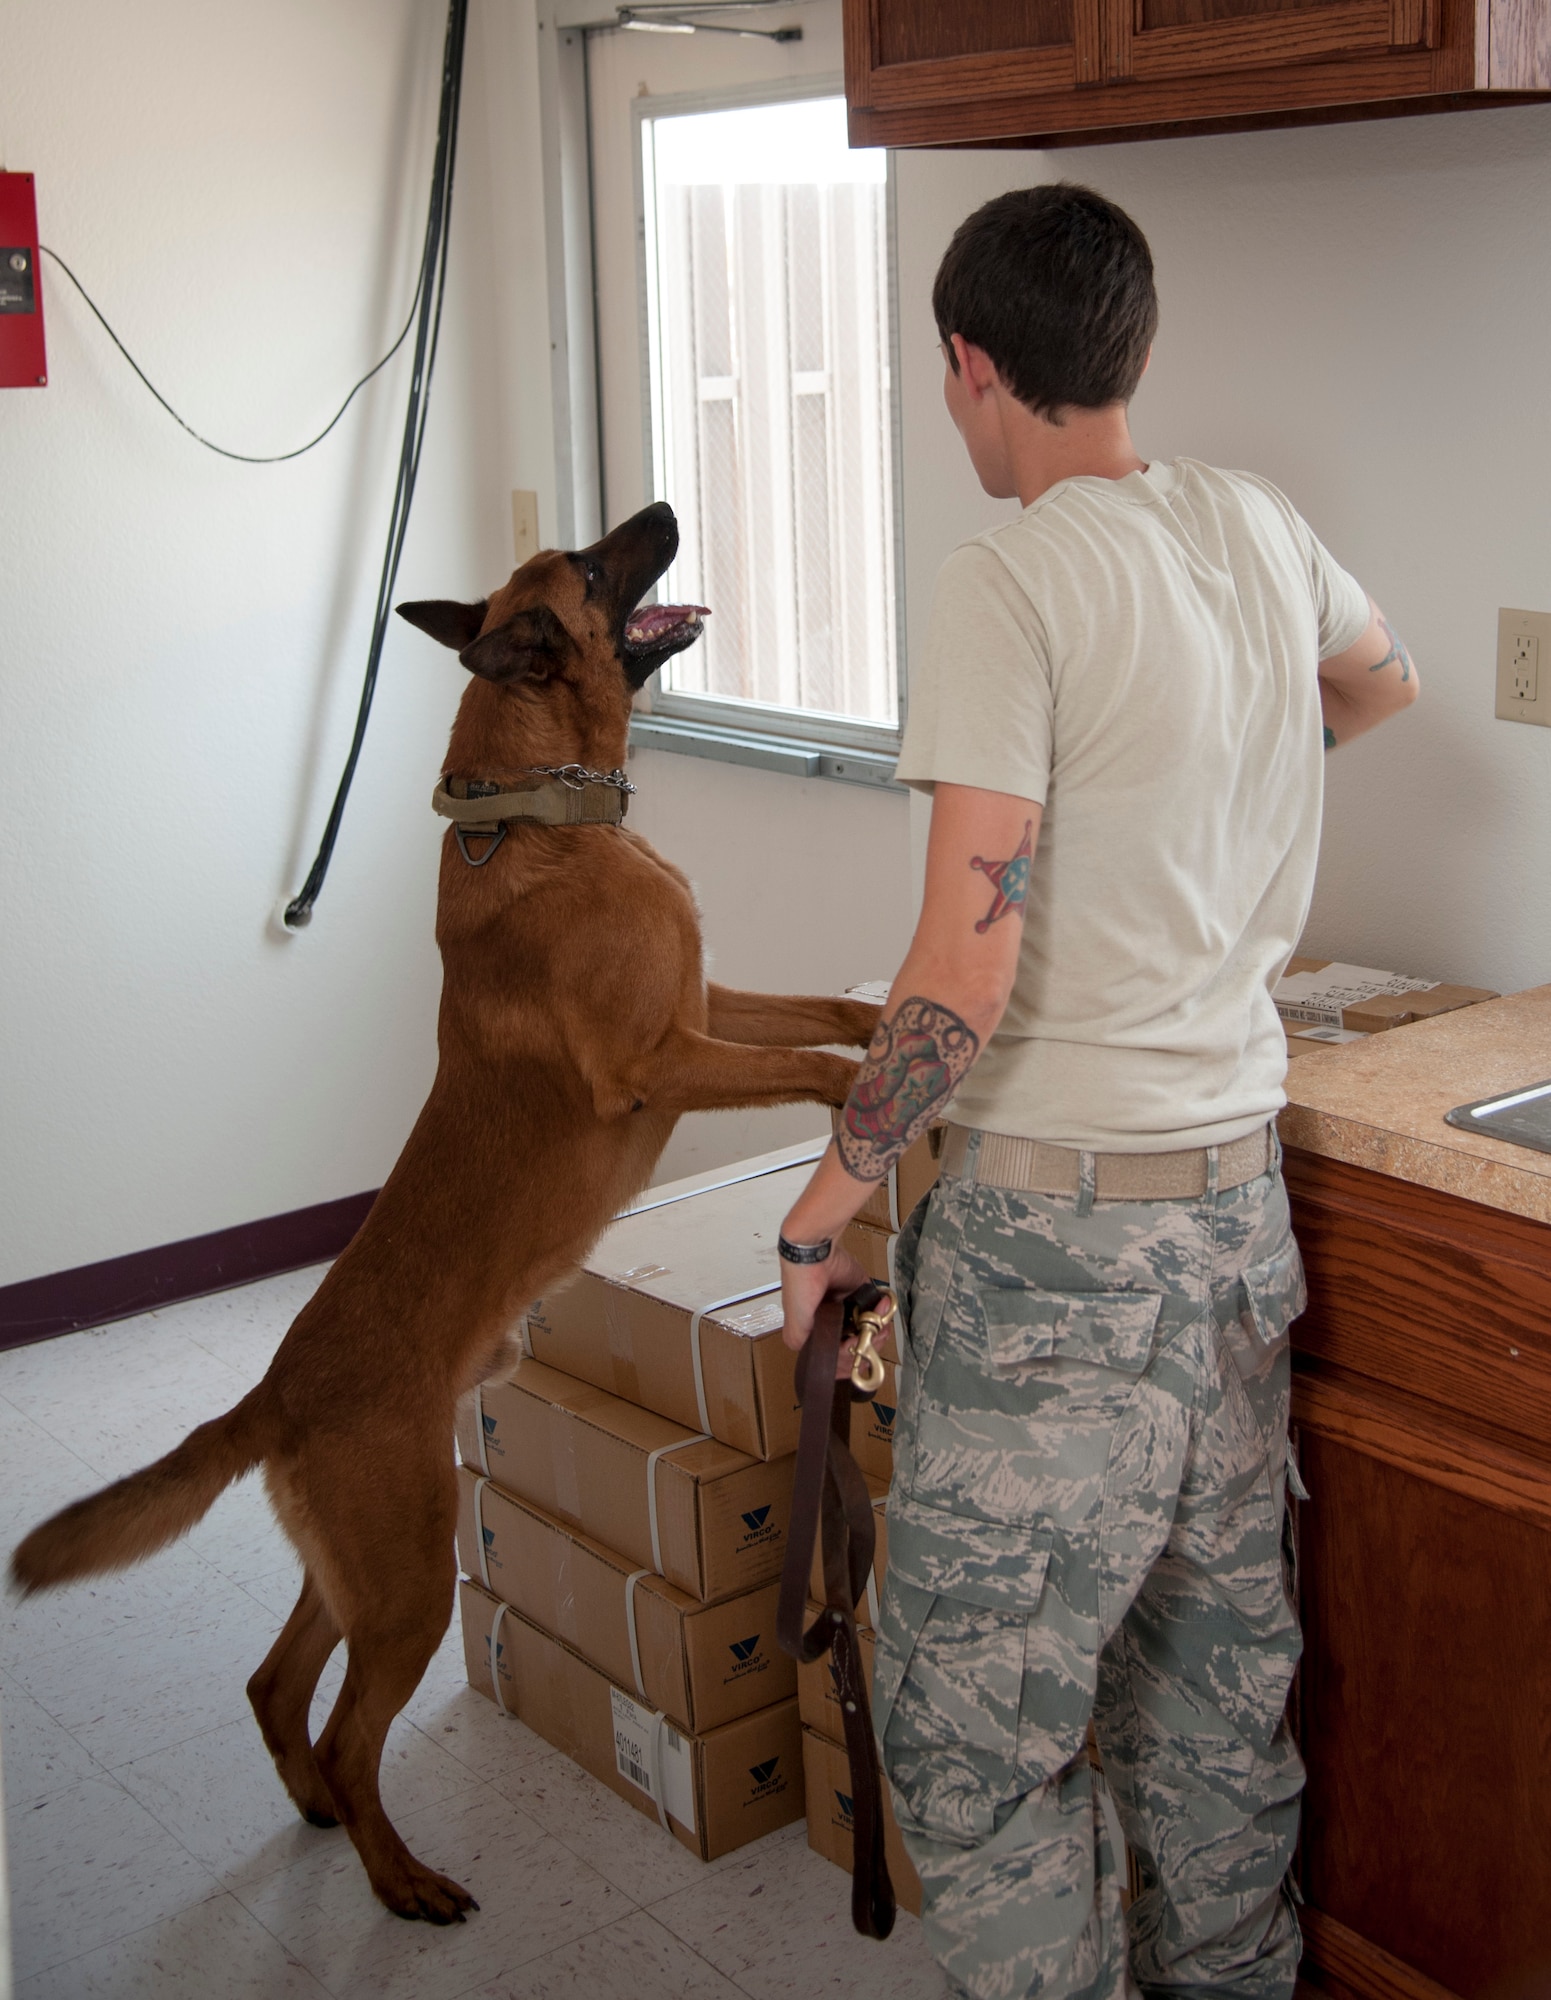 Staff Sgt. Britney Simpson, 47th Security Forces Squadron military working dog handler, instructs her partner, Eewok, to search cabinets for explosives during a training exercise at Laughlin Air Force Base, Texas, May 22, 2013. Military working dogs are trained with scent kits to ensure they can complete their mission, whether they are at home station or deployed. (U.S. Air Force photo/Airman 1st Class John D. Partlow)